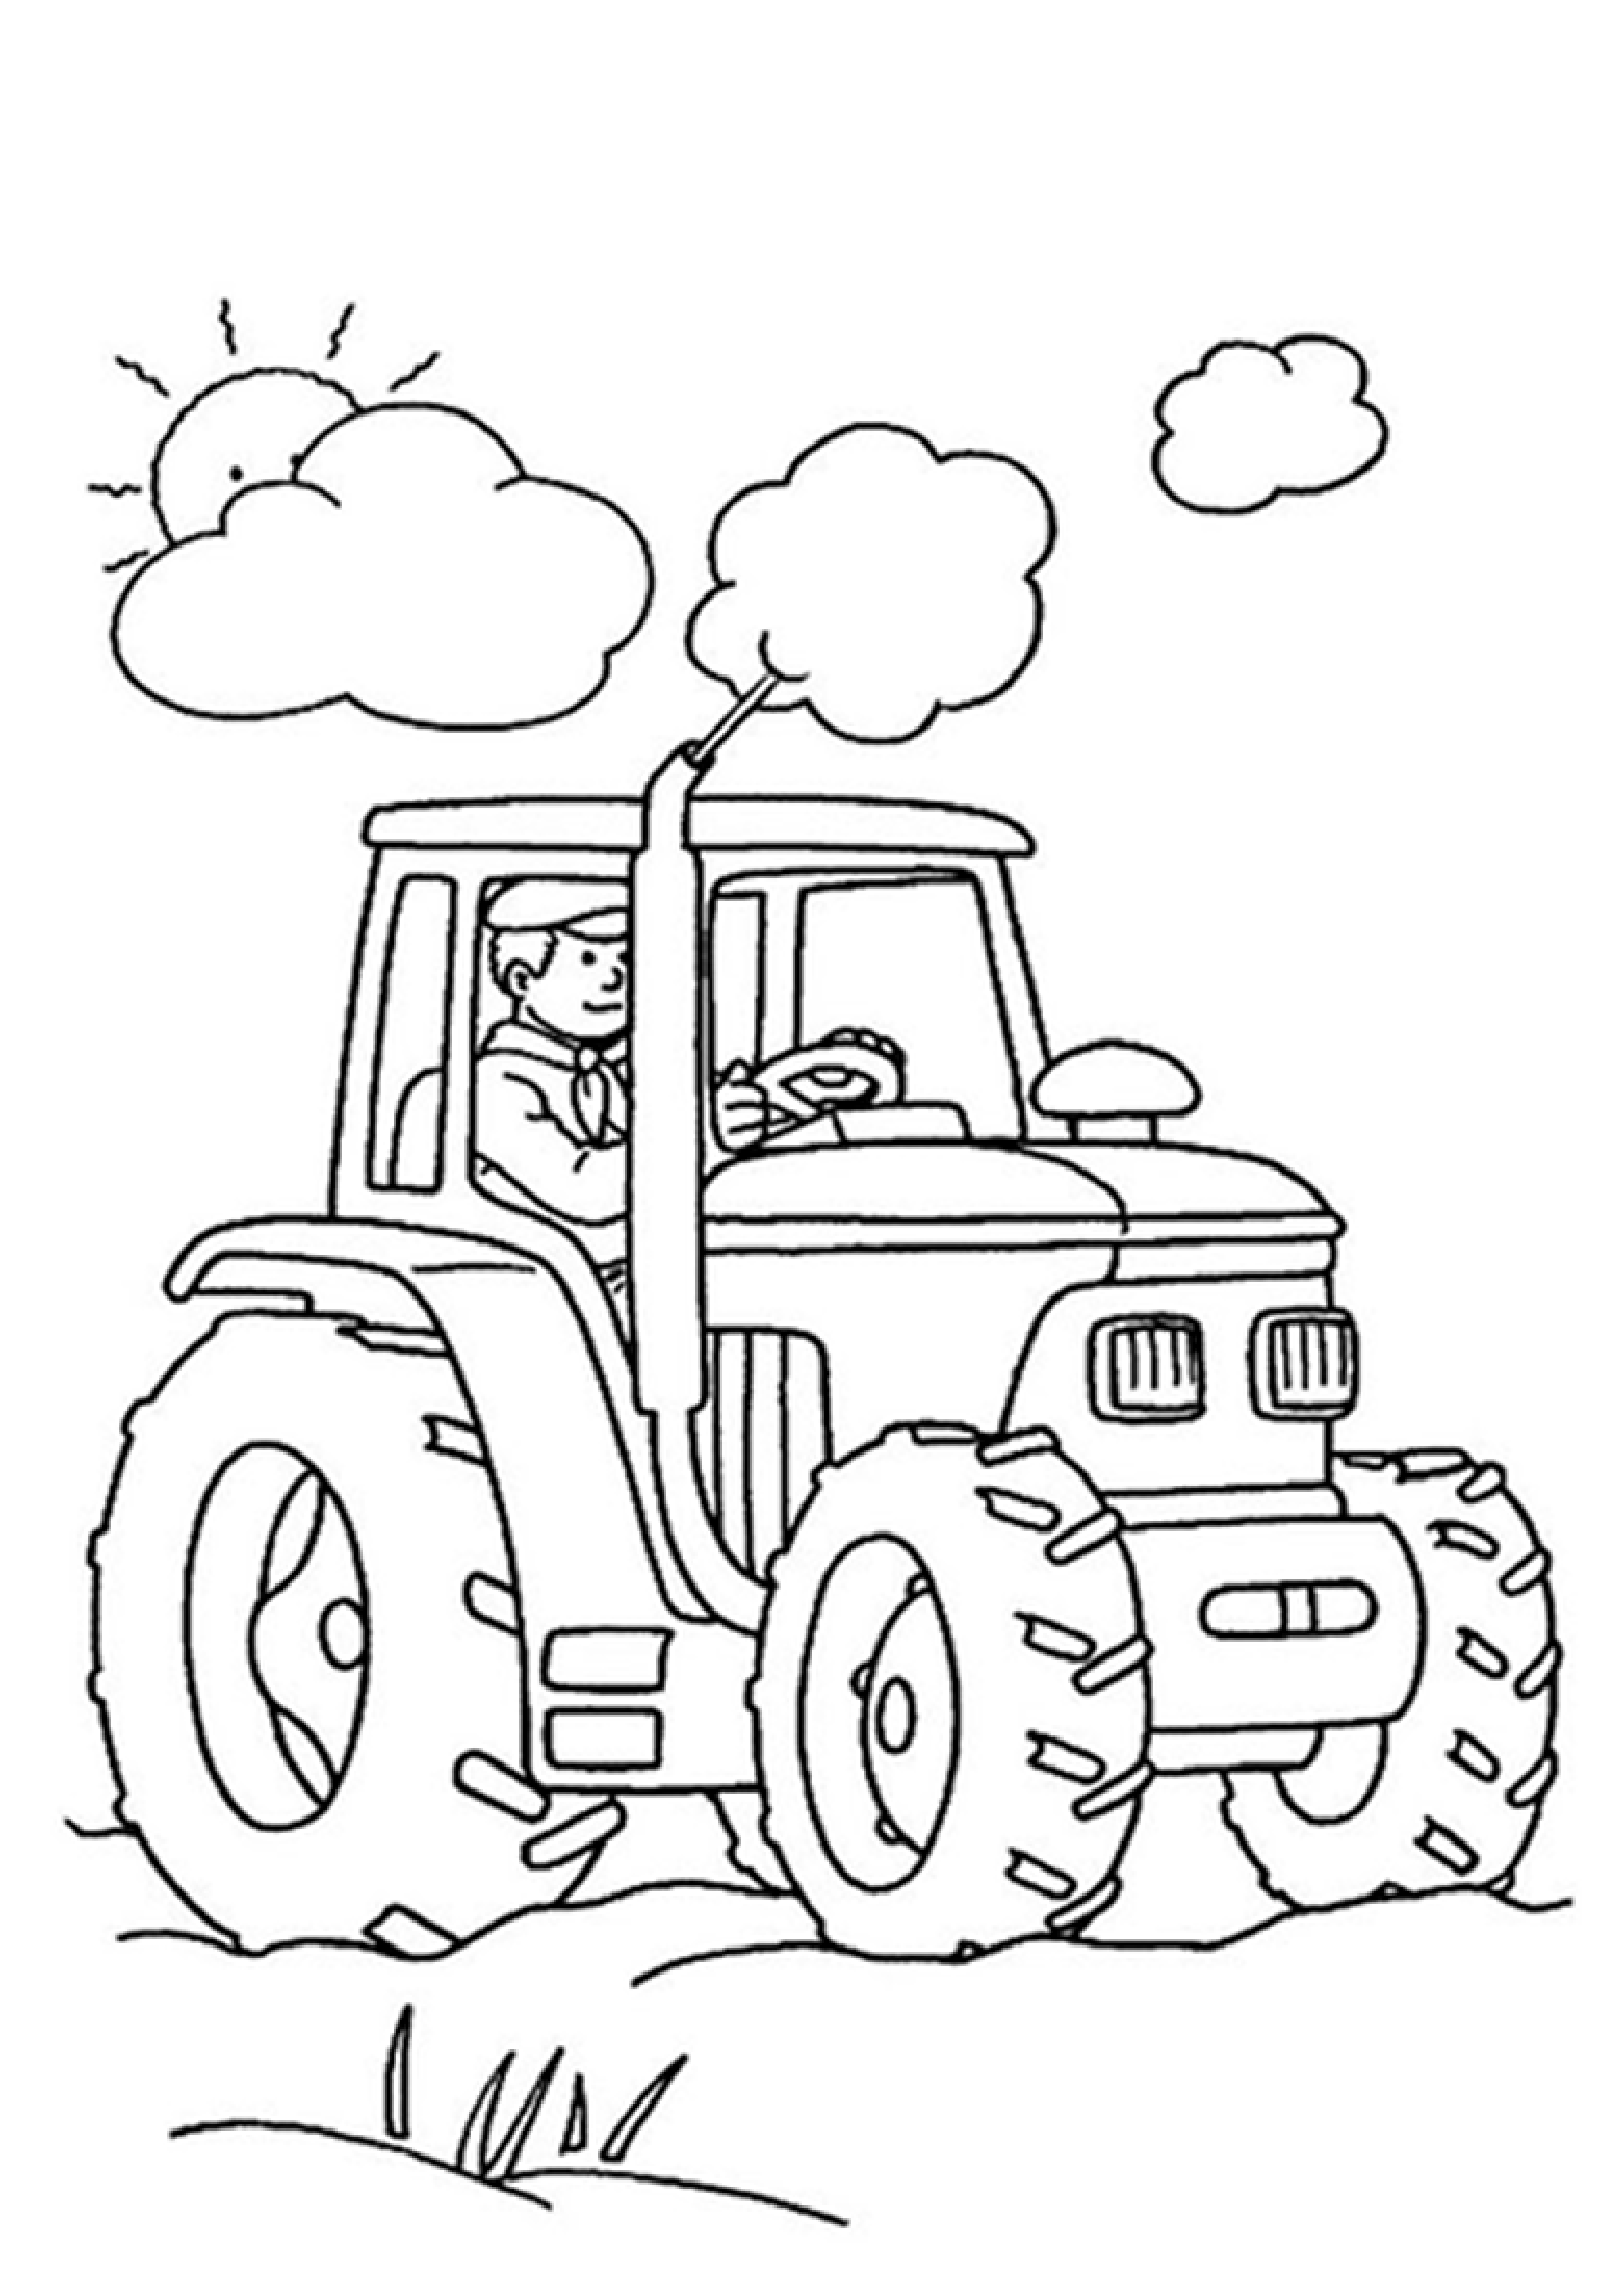 Farm free to color for children Farm Kids Coloring Pages